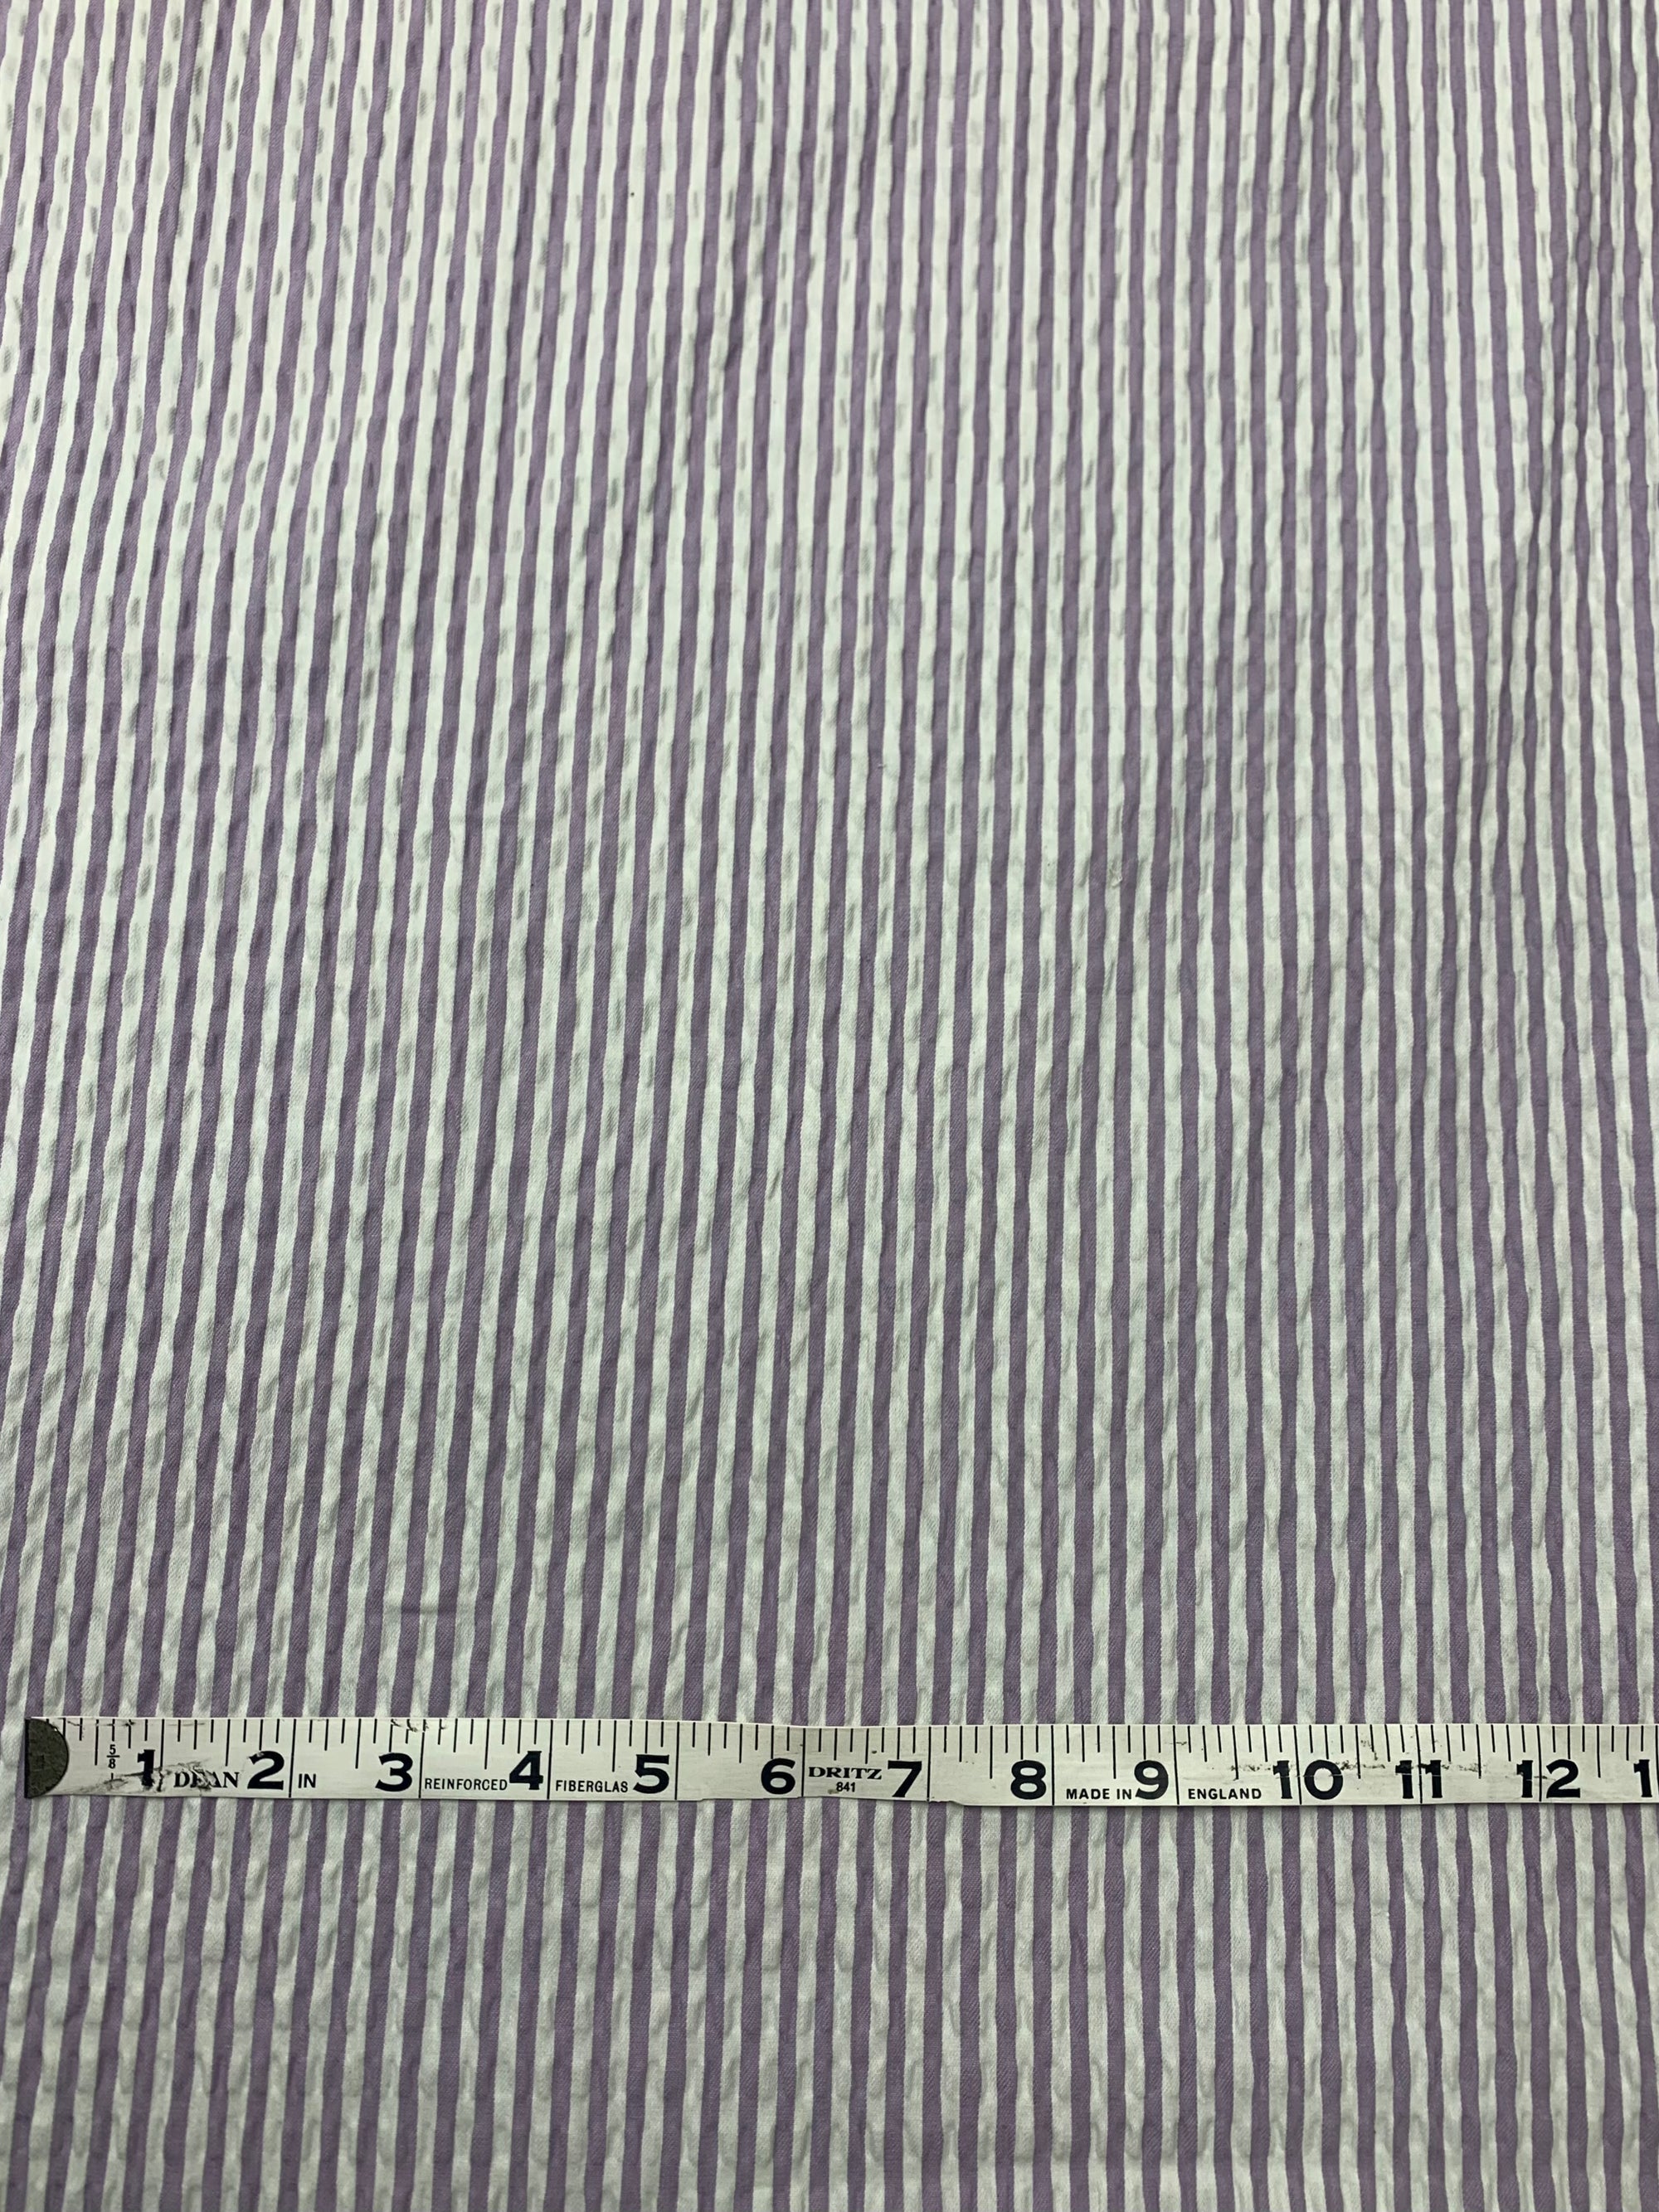 A spiraled  cotton seersucker fabric in a striped Lilac and White vertically